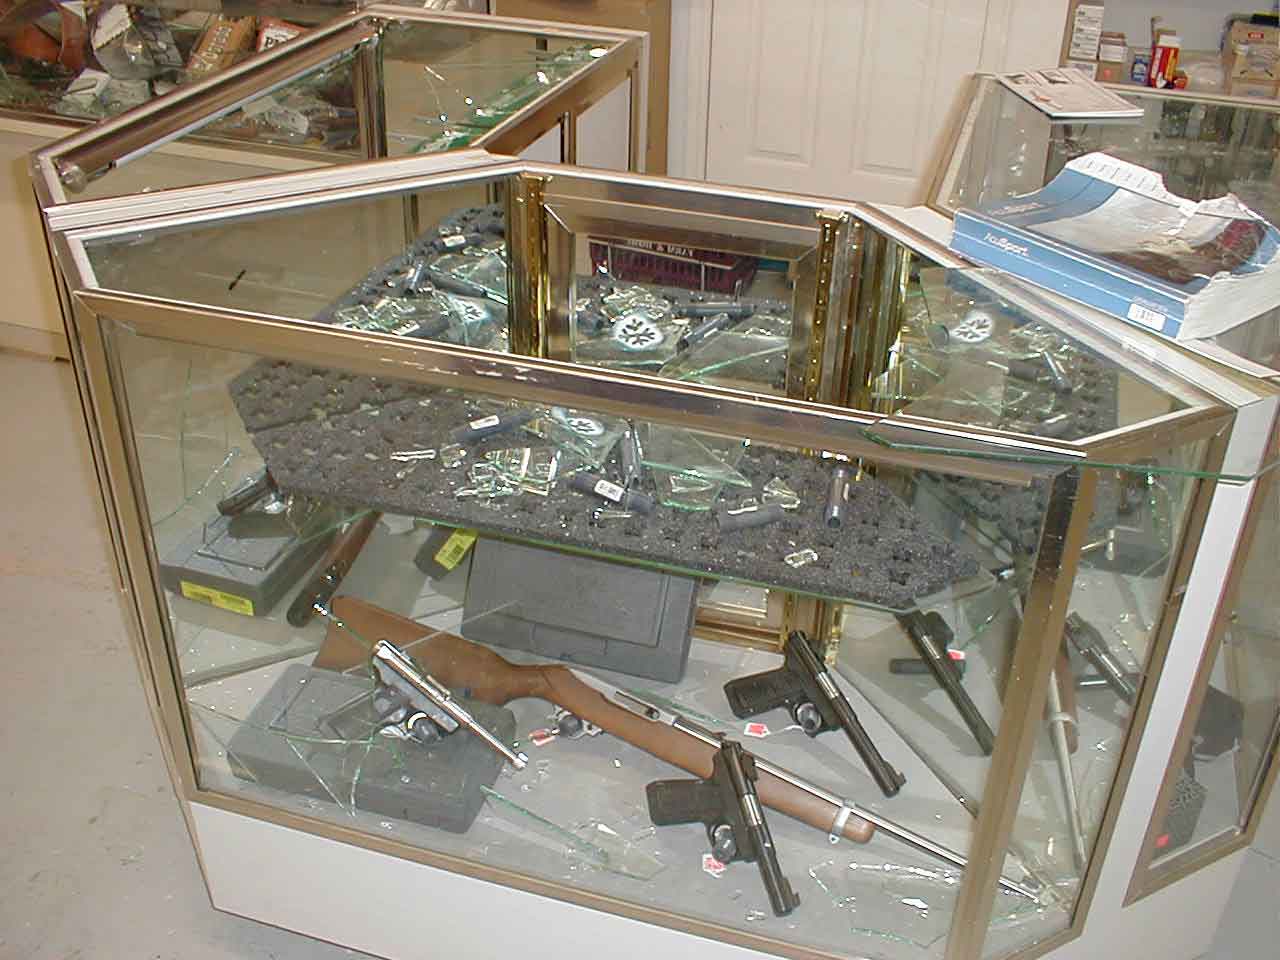 A gun case that has been broken into. Glass is everywhere and there are firearms left behind.